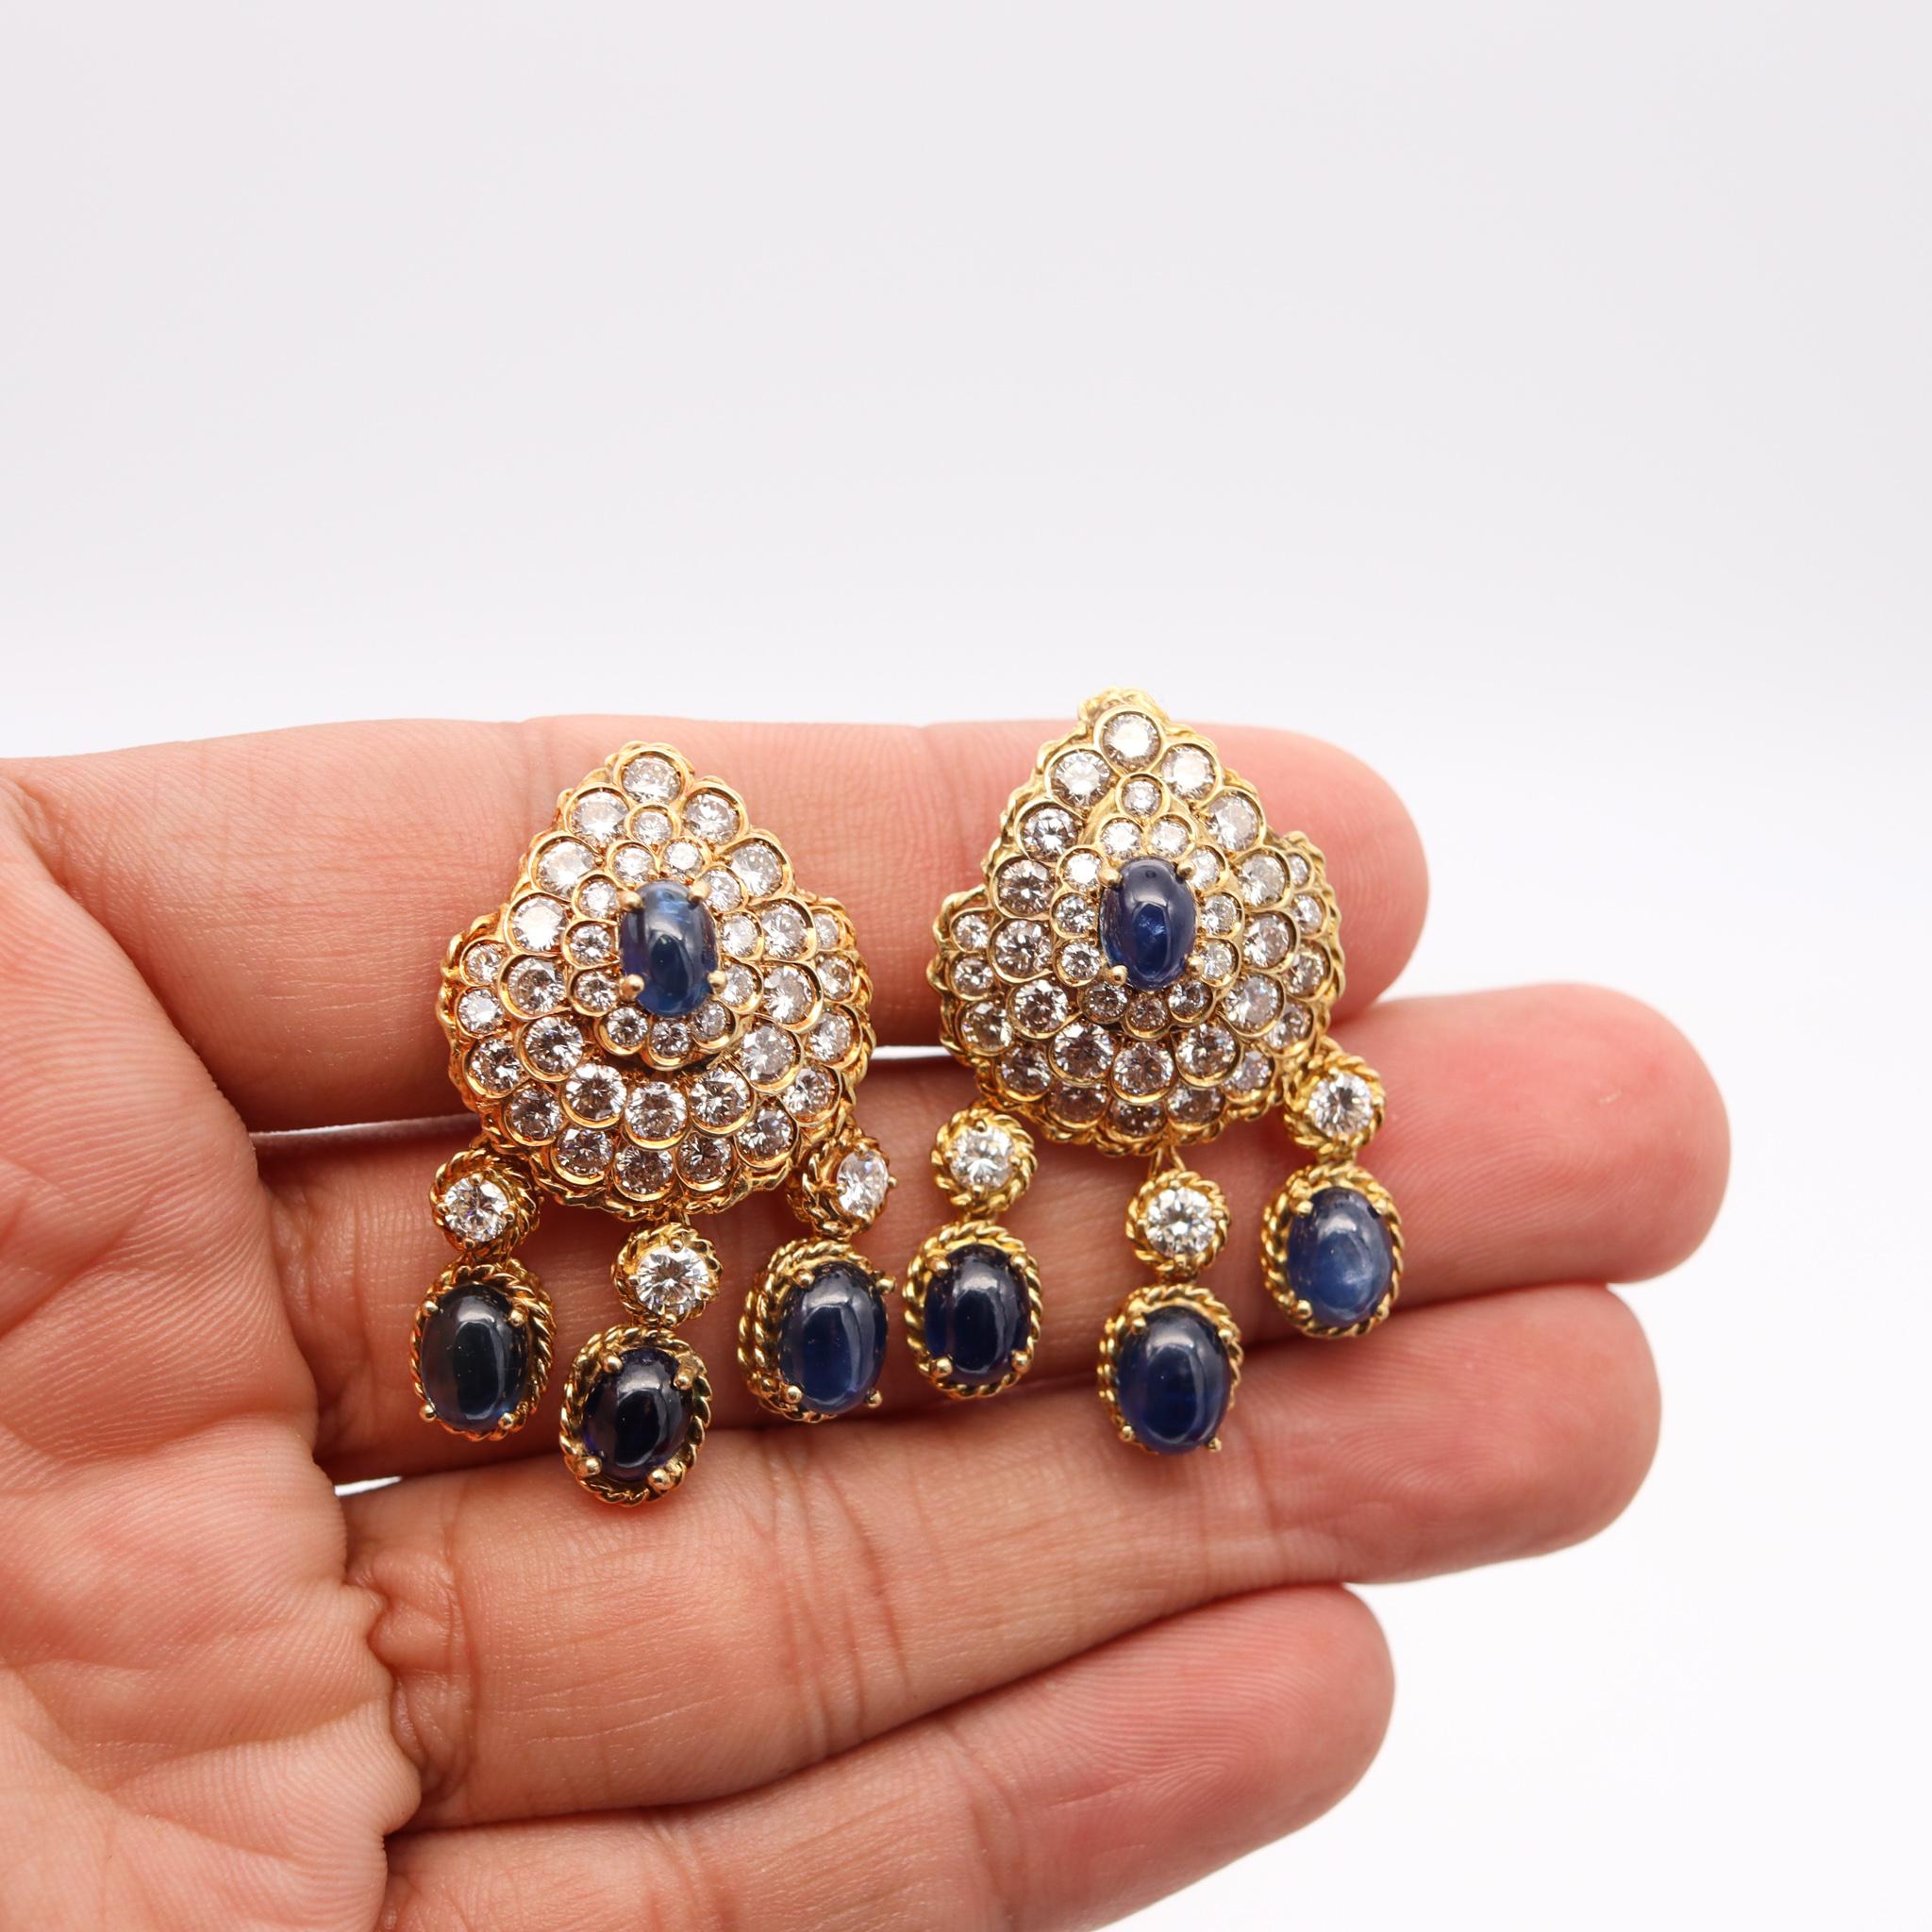 Cabochon Tadini Gia Certified Dangle Earrings in 18kt Gold 23.84 Ctw Sapphire & Diamonds